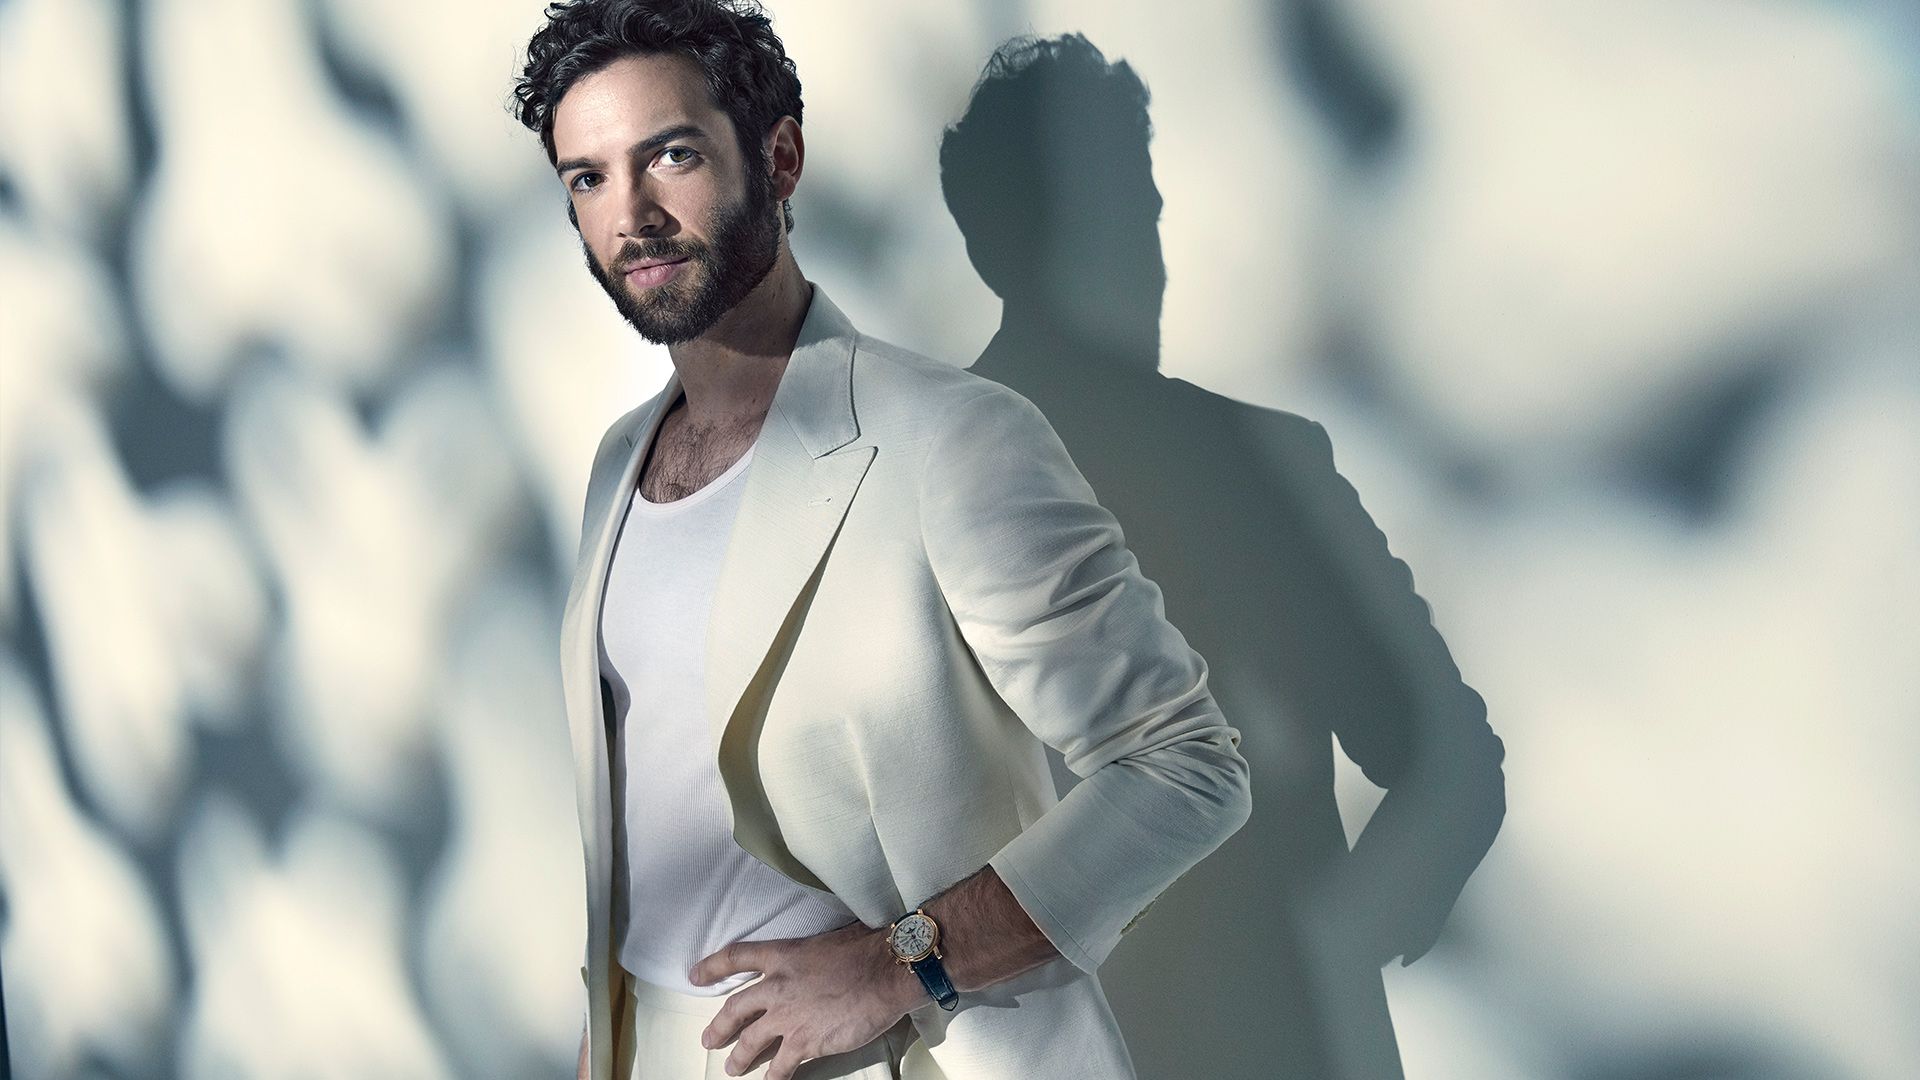 Actor Ethan Peck of Star Trek Discovery wears a white suit and white tank top against a white wall.